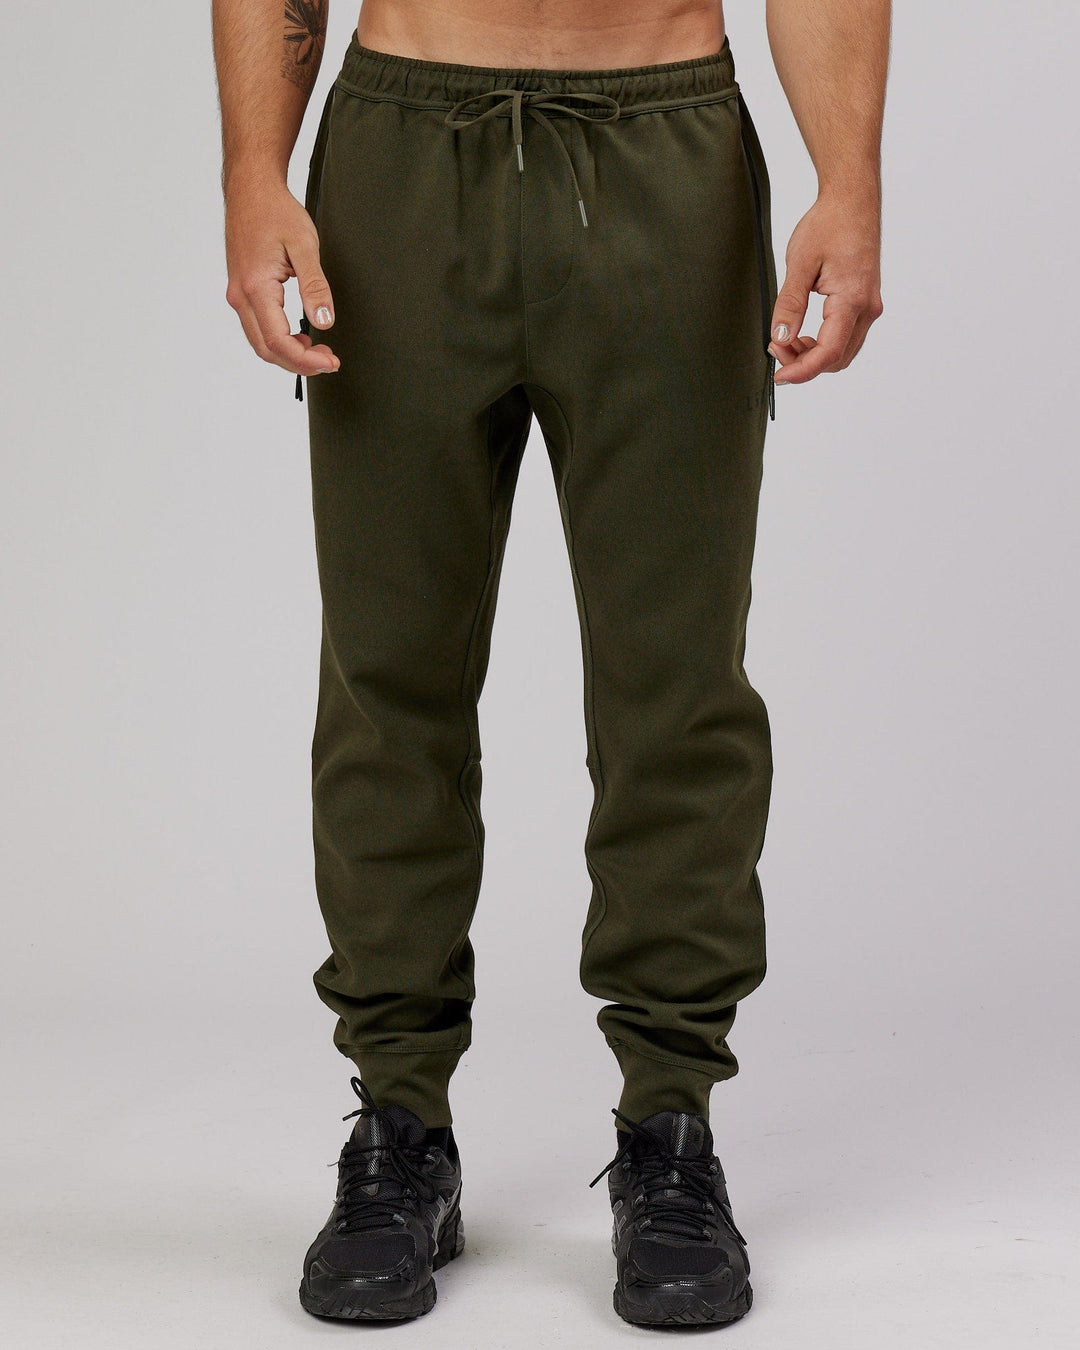 Mens Athlete ForgedFleece Zip Track Pants - Forest Night | LSKD